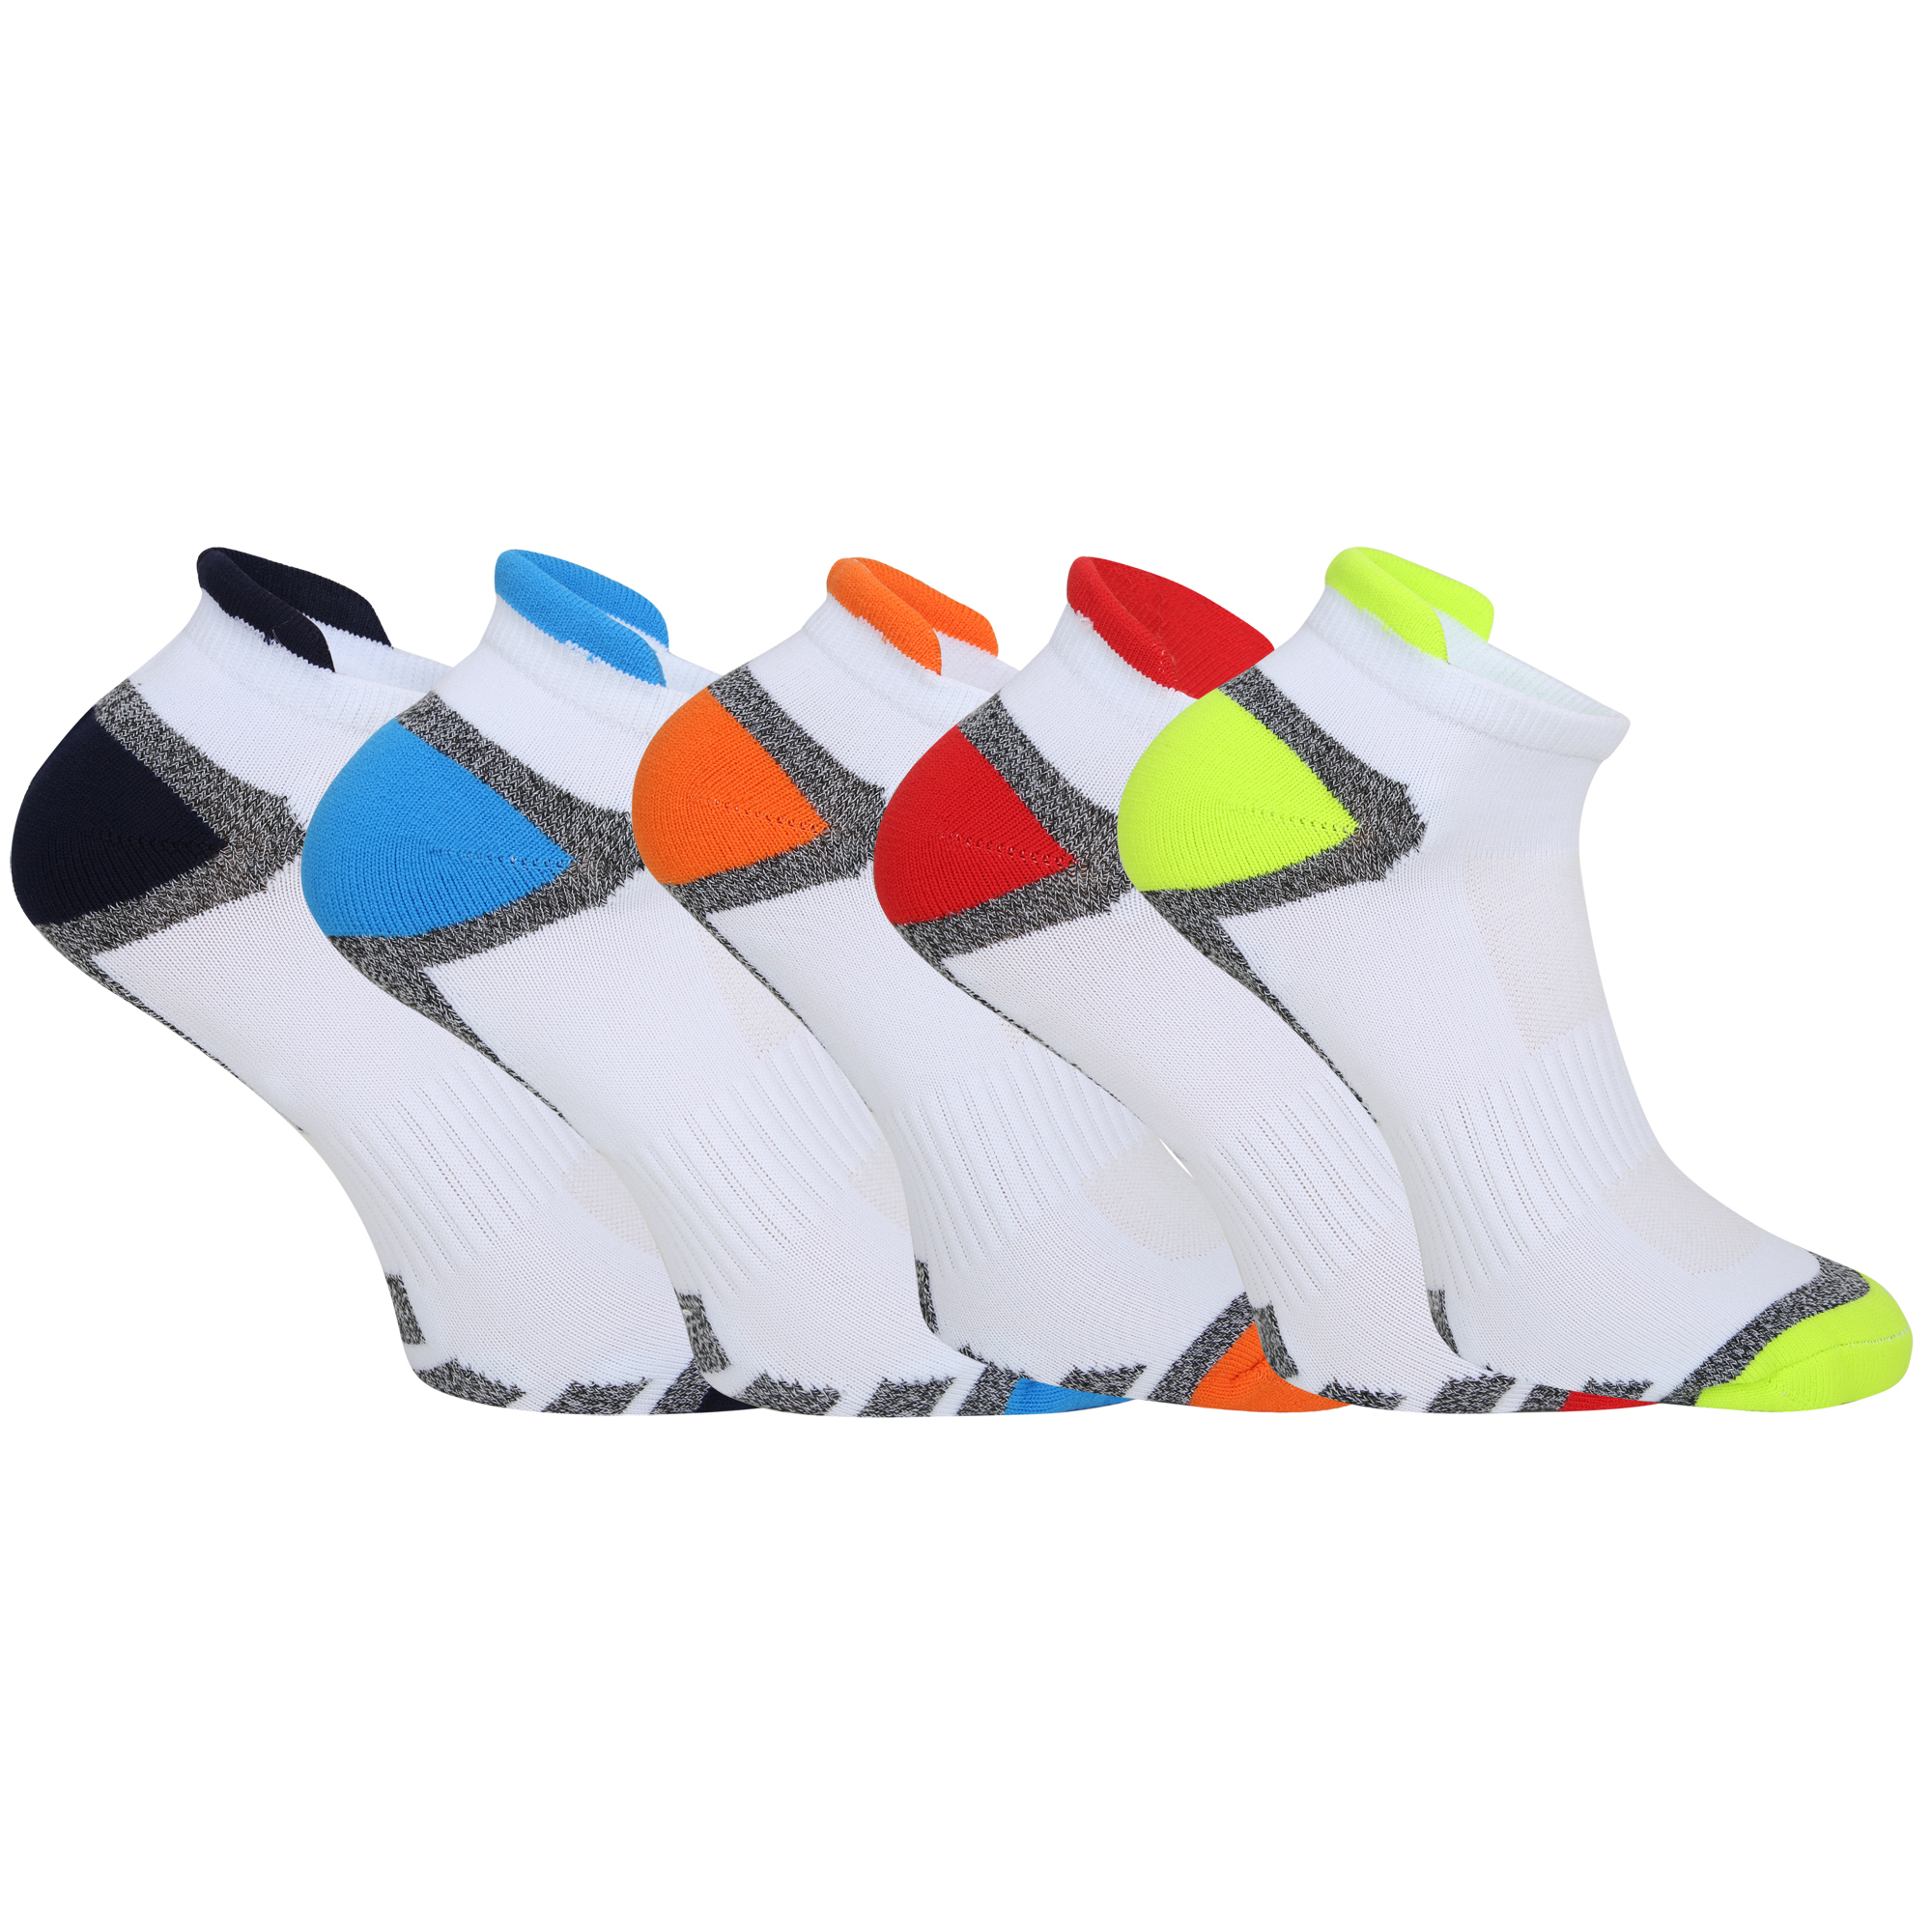 Mens Invisible Socks Trainer Liners/Gym COTTON RICH UK 6-11 Comfort Arch Support 